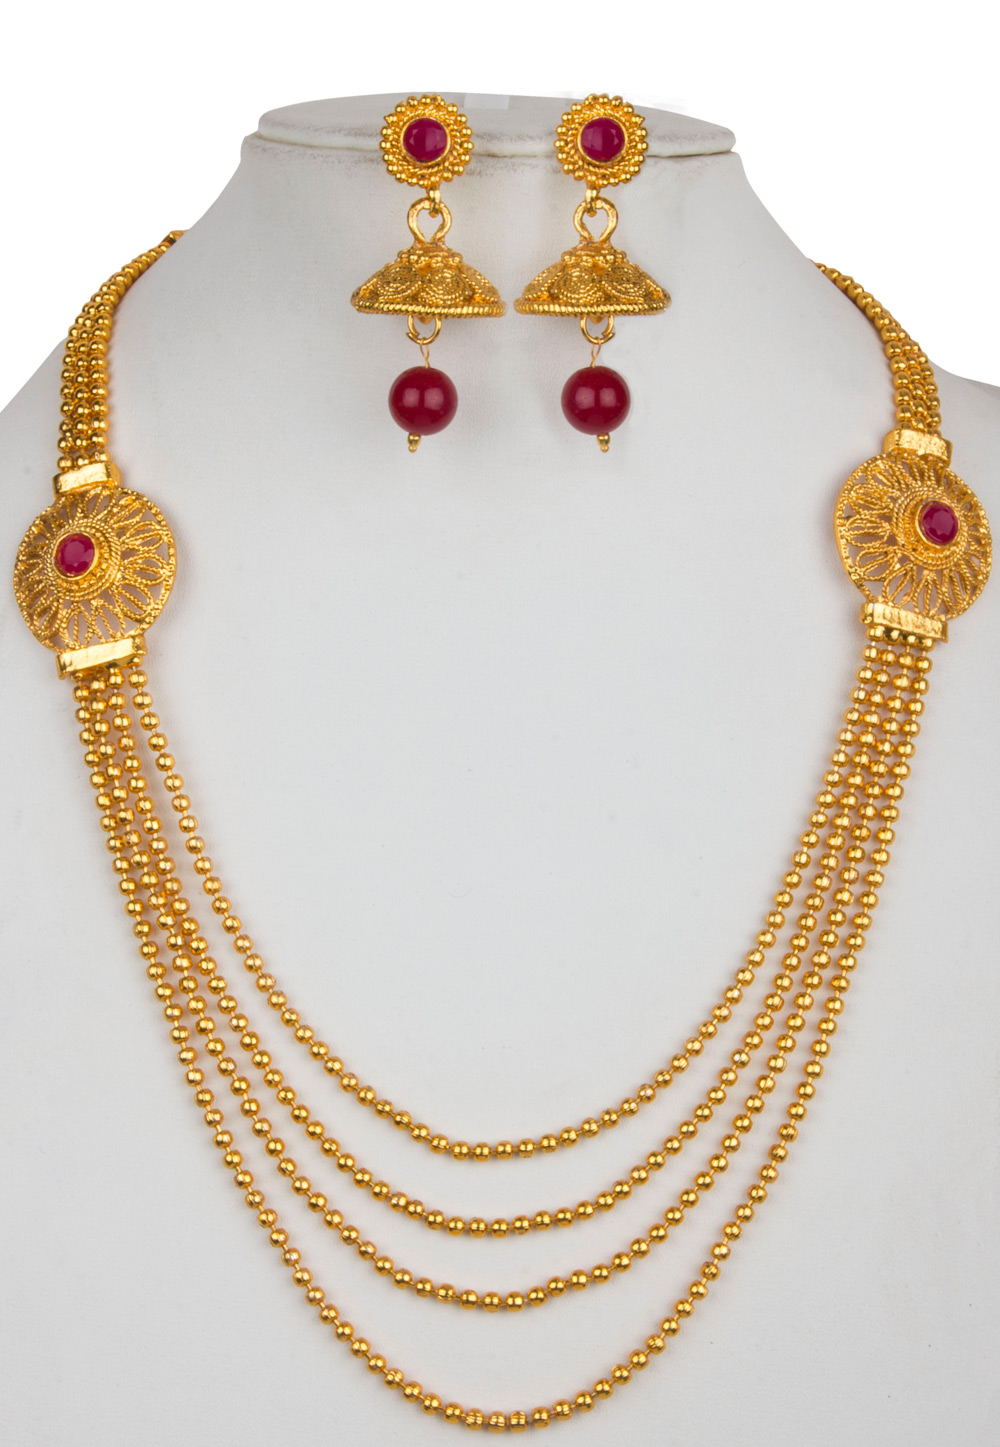 Golden Alloy Necklace With Earrings 157147